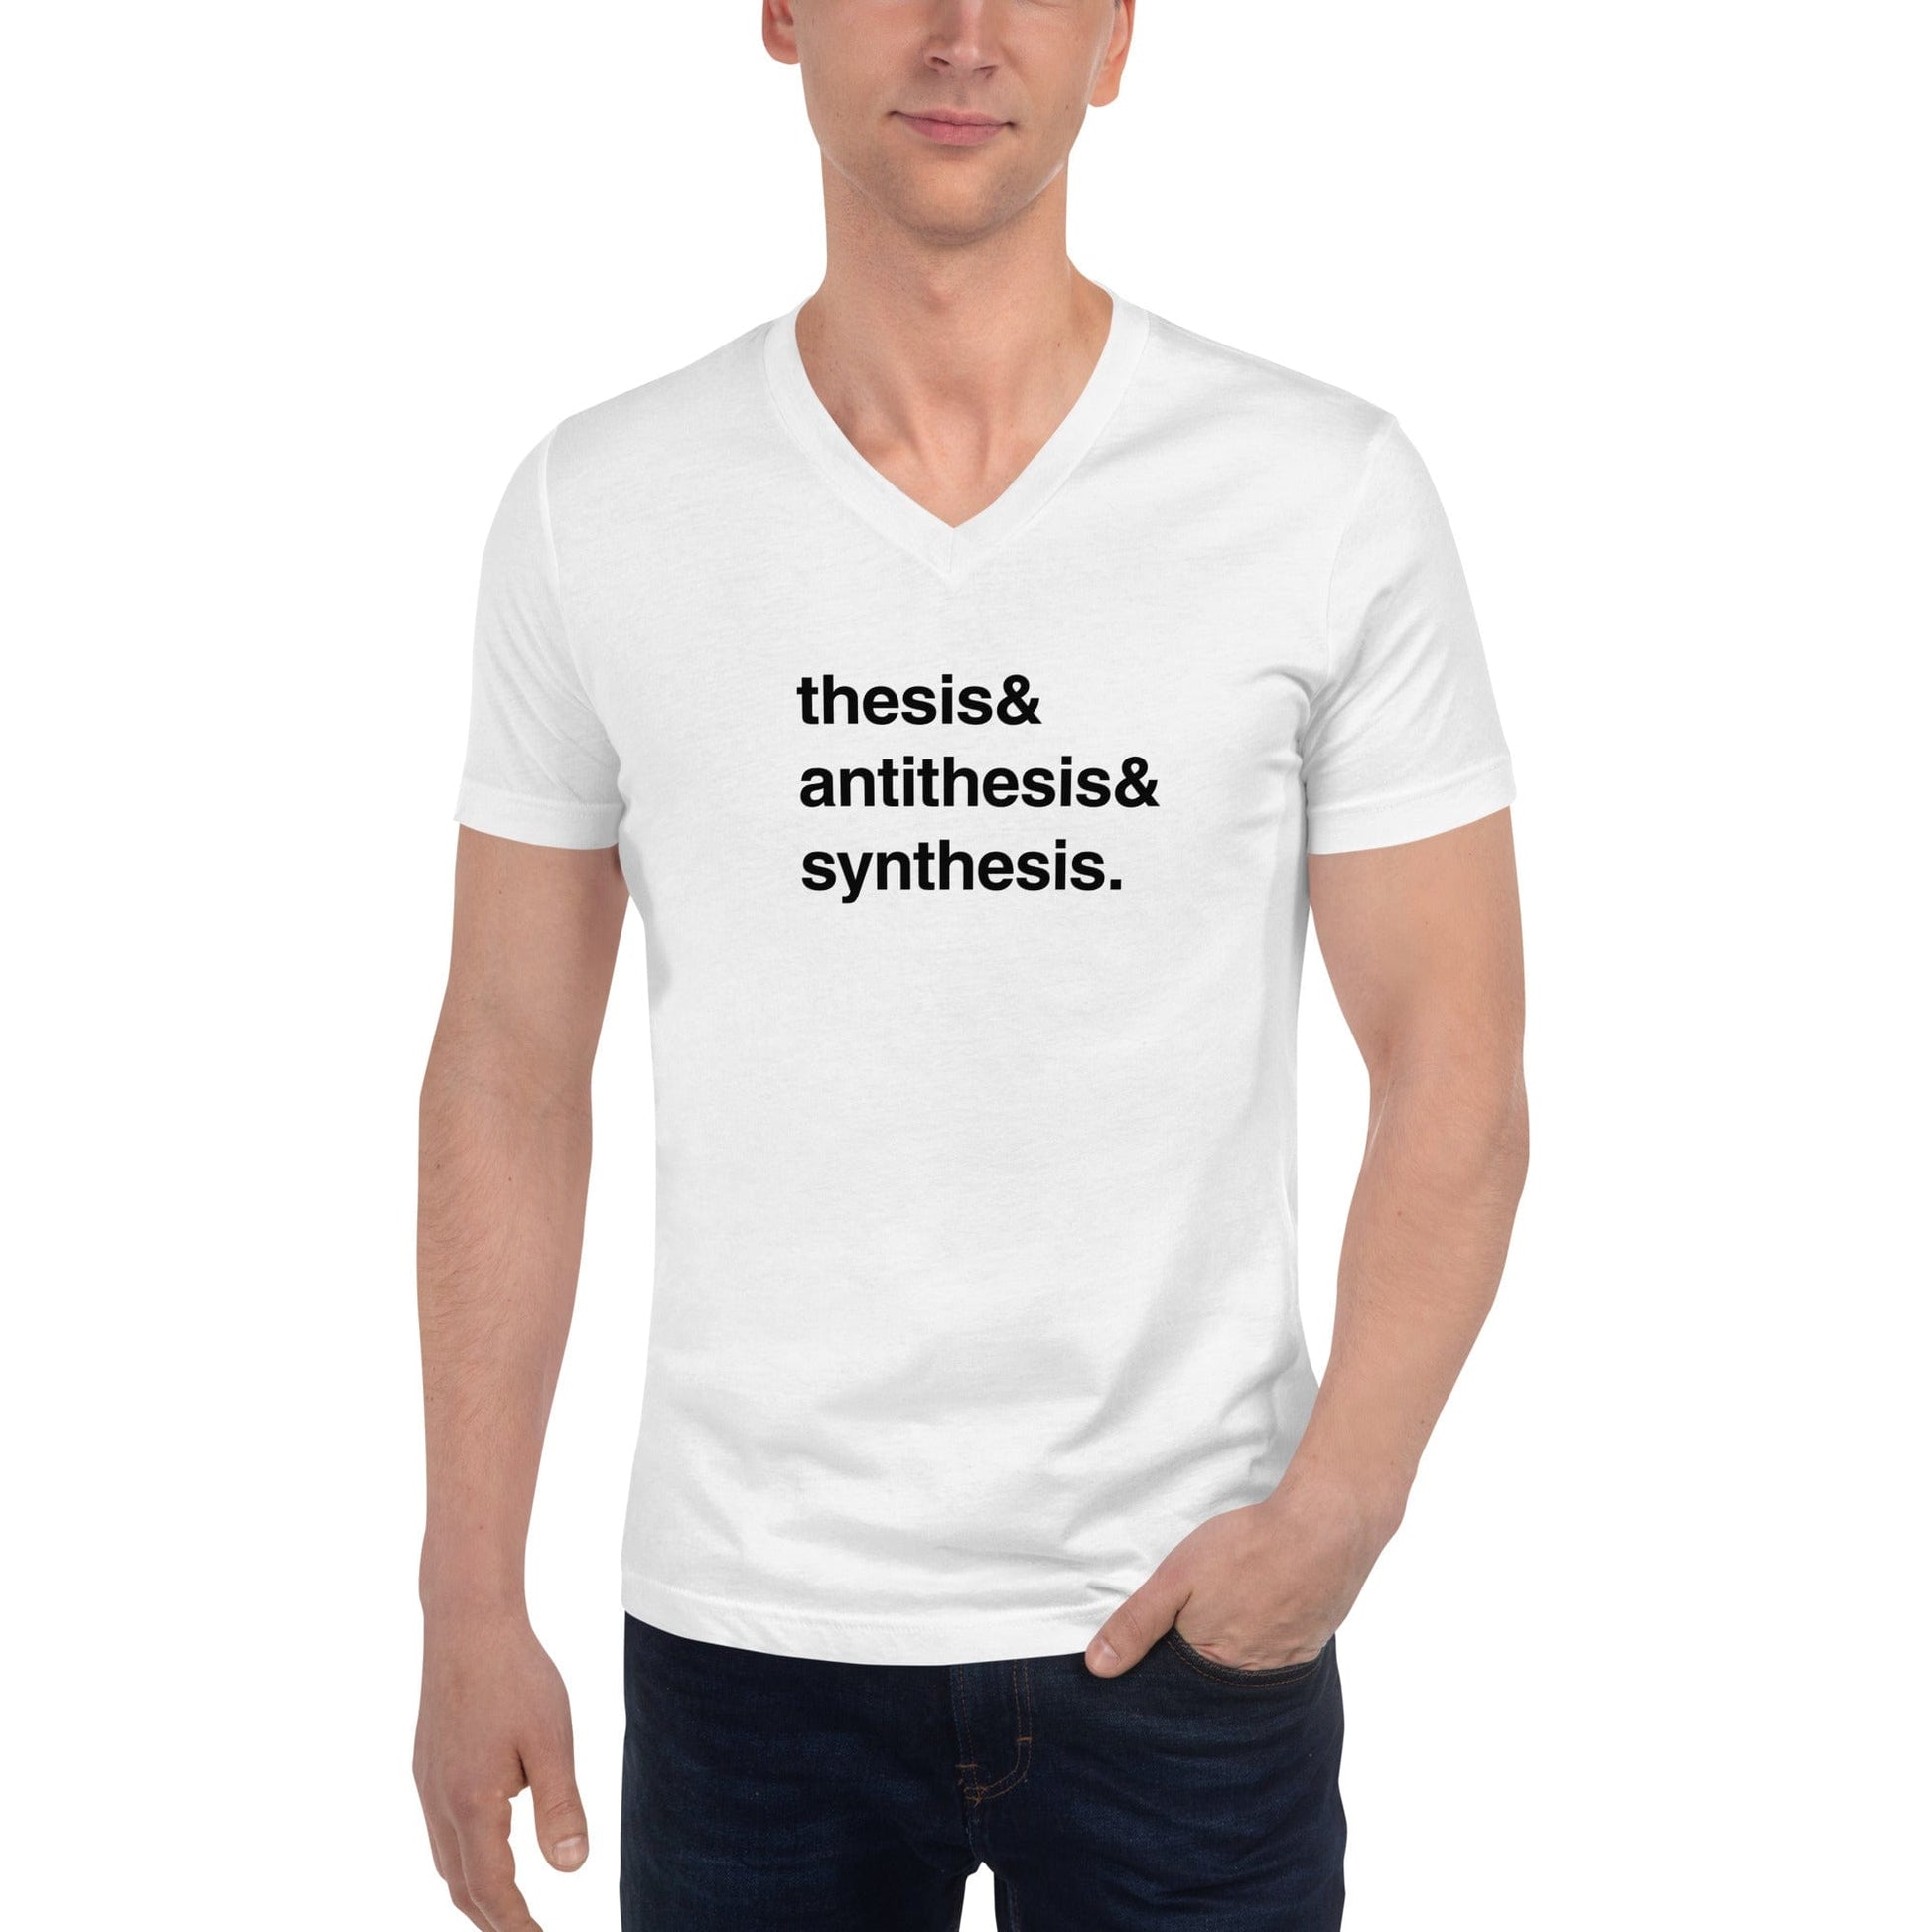 Thesis & Antithesis & Synthesis - Unisex V-Neck T-Shirt